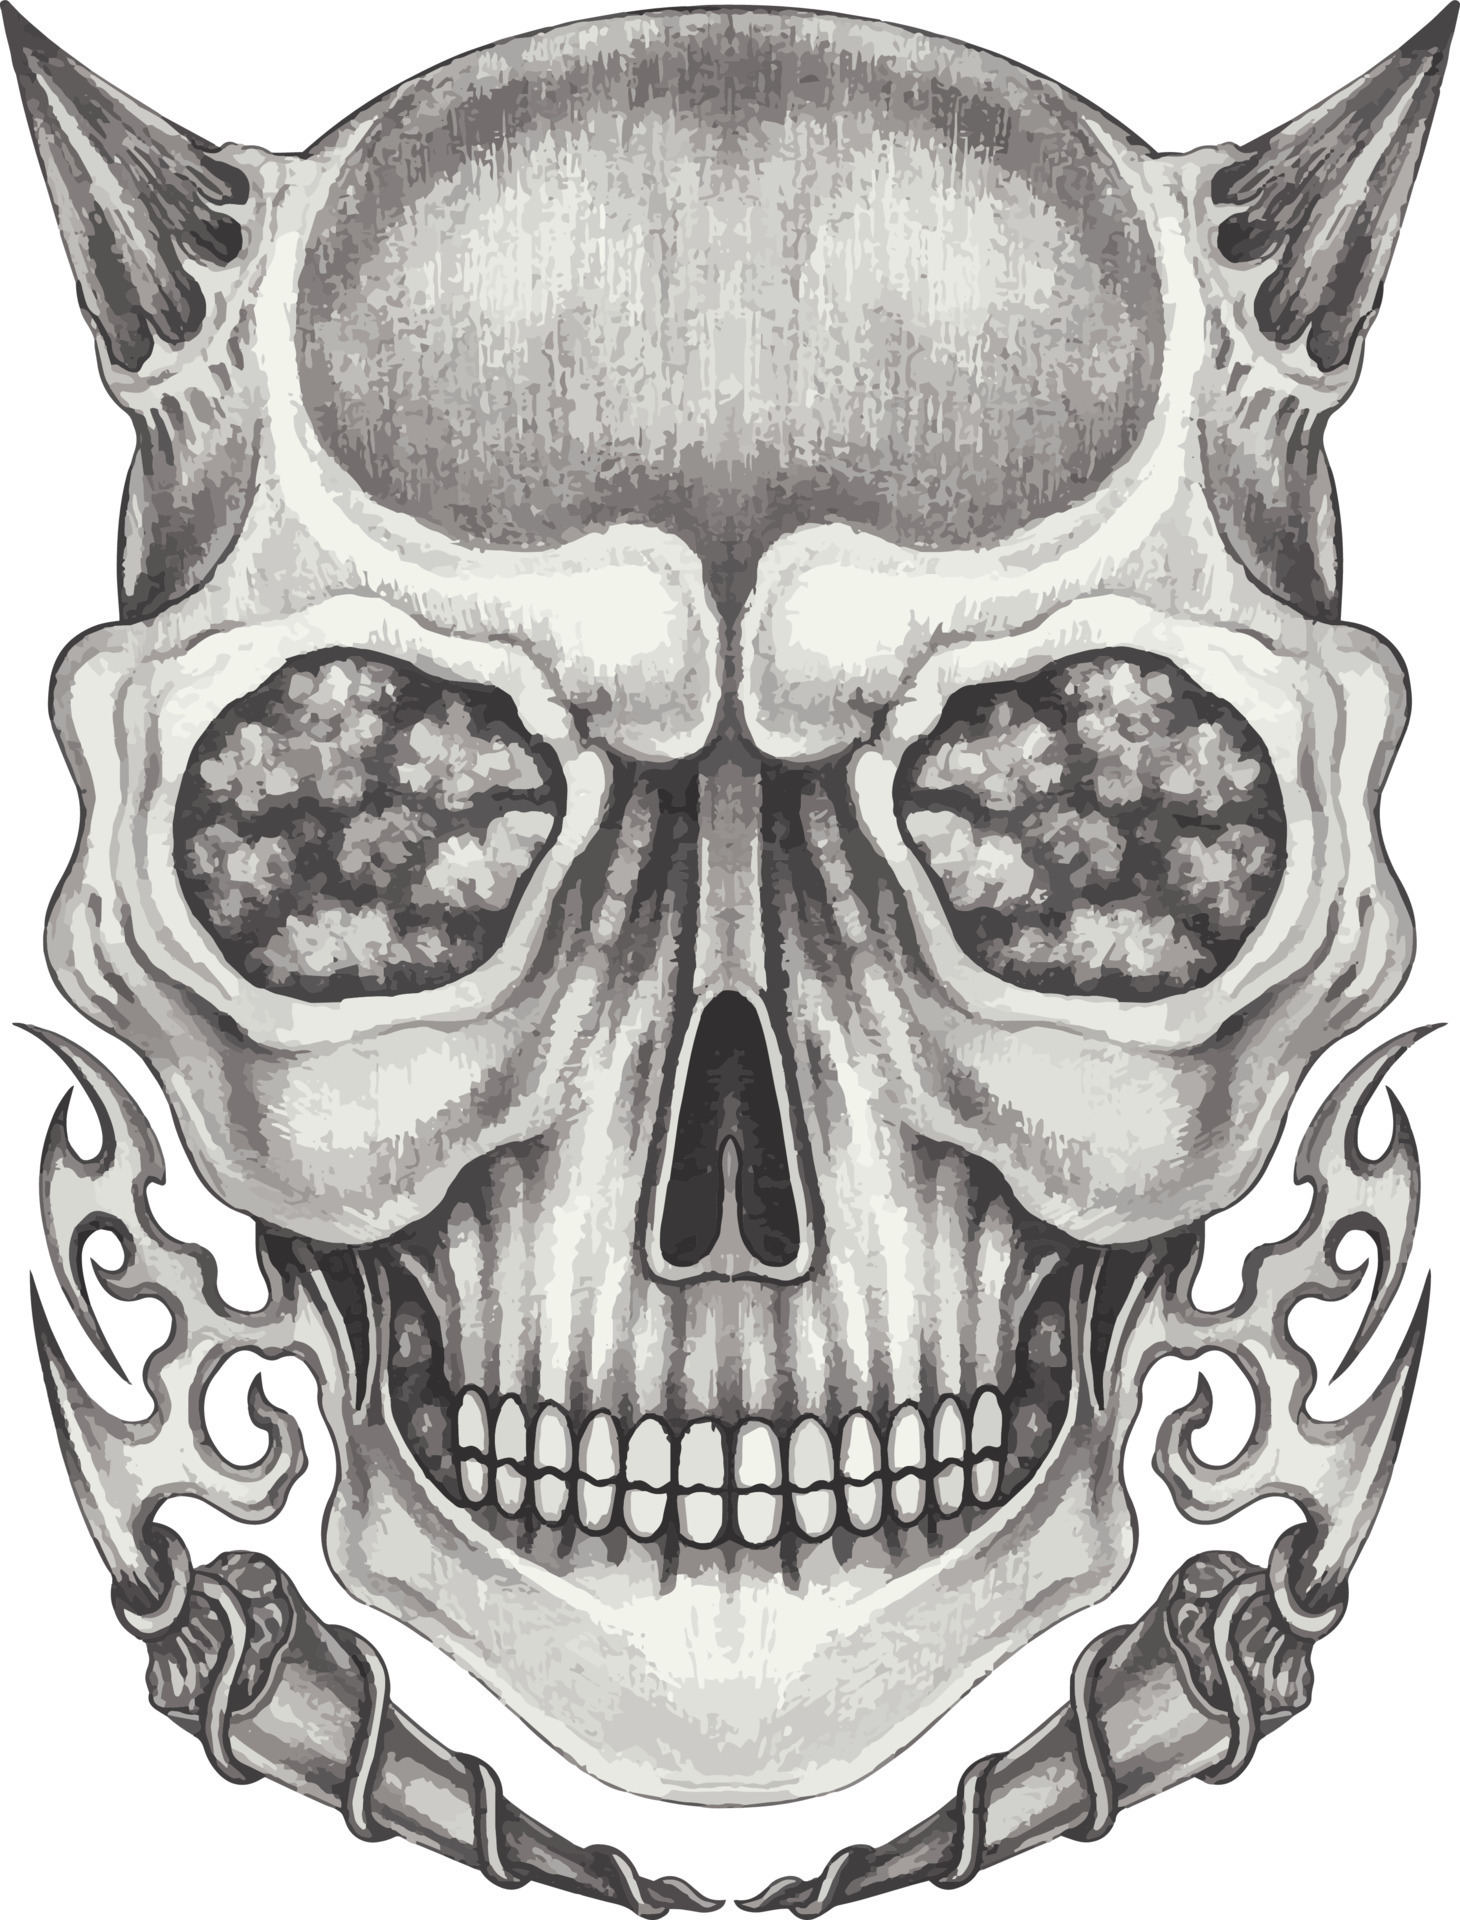 Buy Skull and Bear Smokey Tattoo Design Waterslide Decal for Online in  India  Etsy